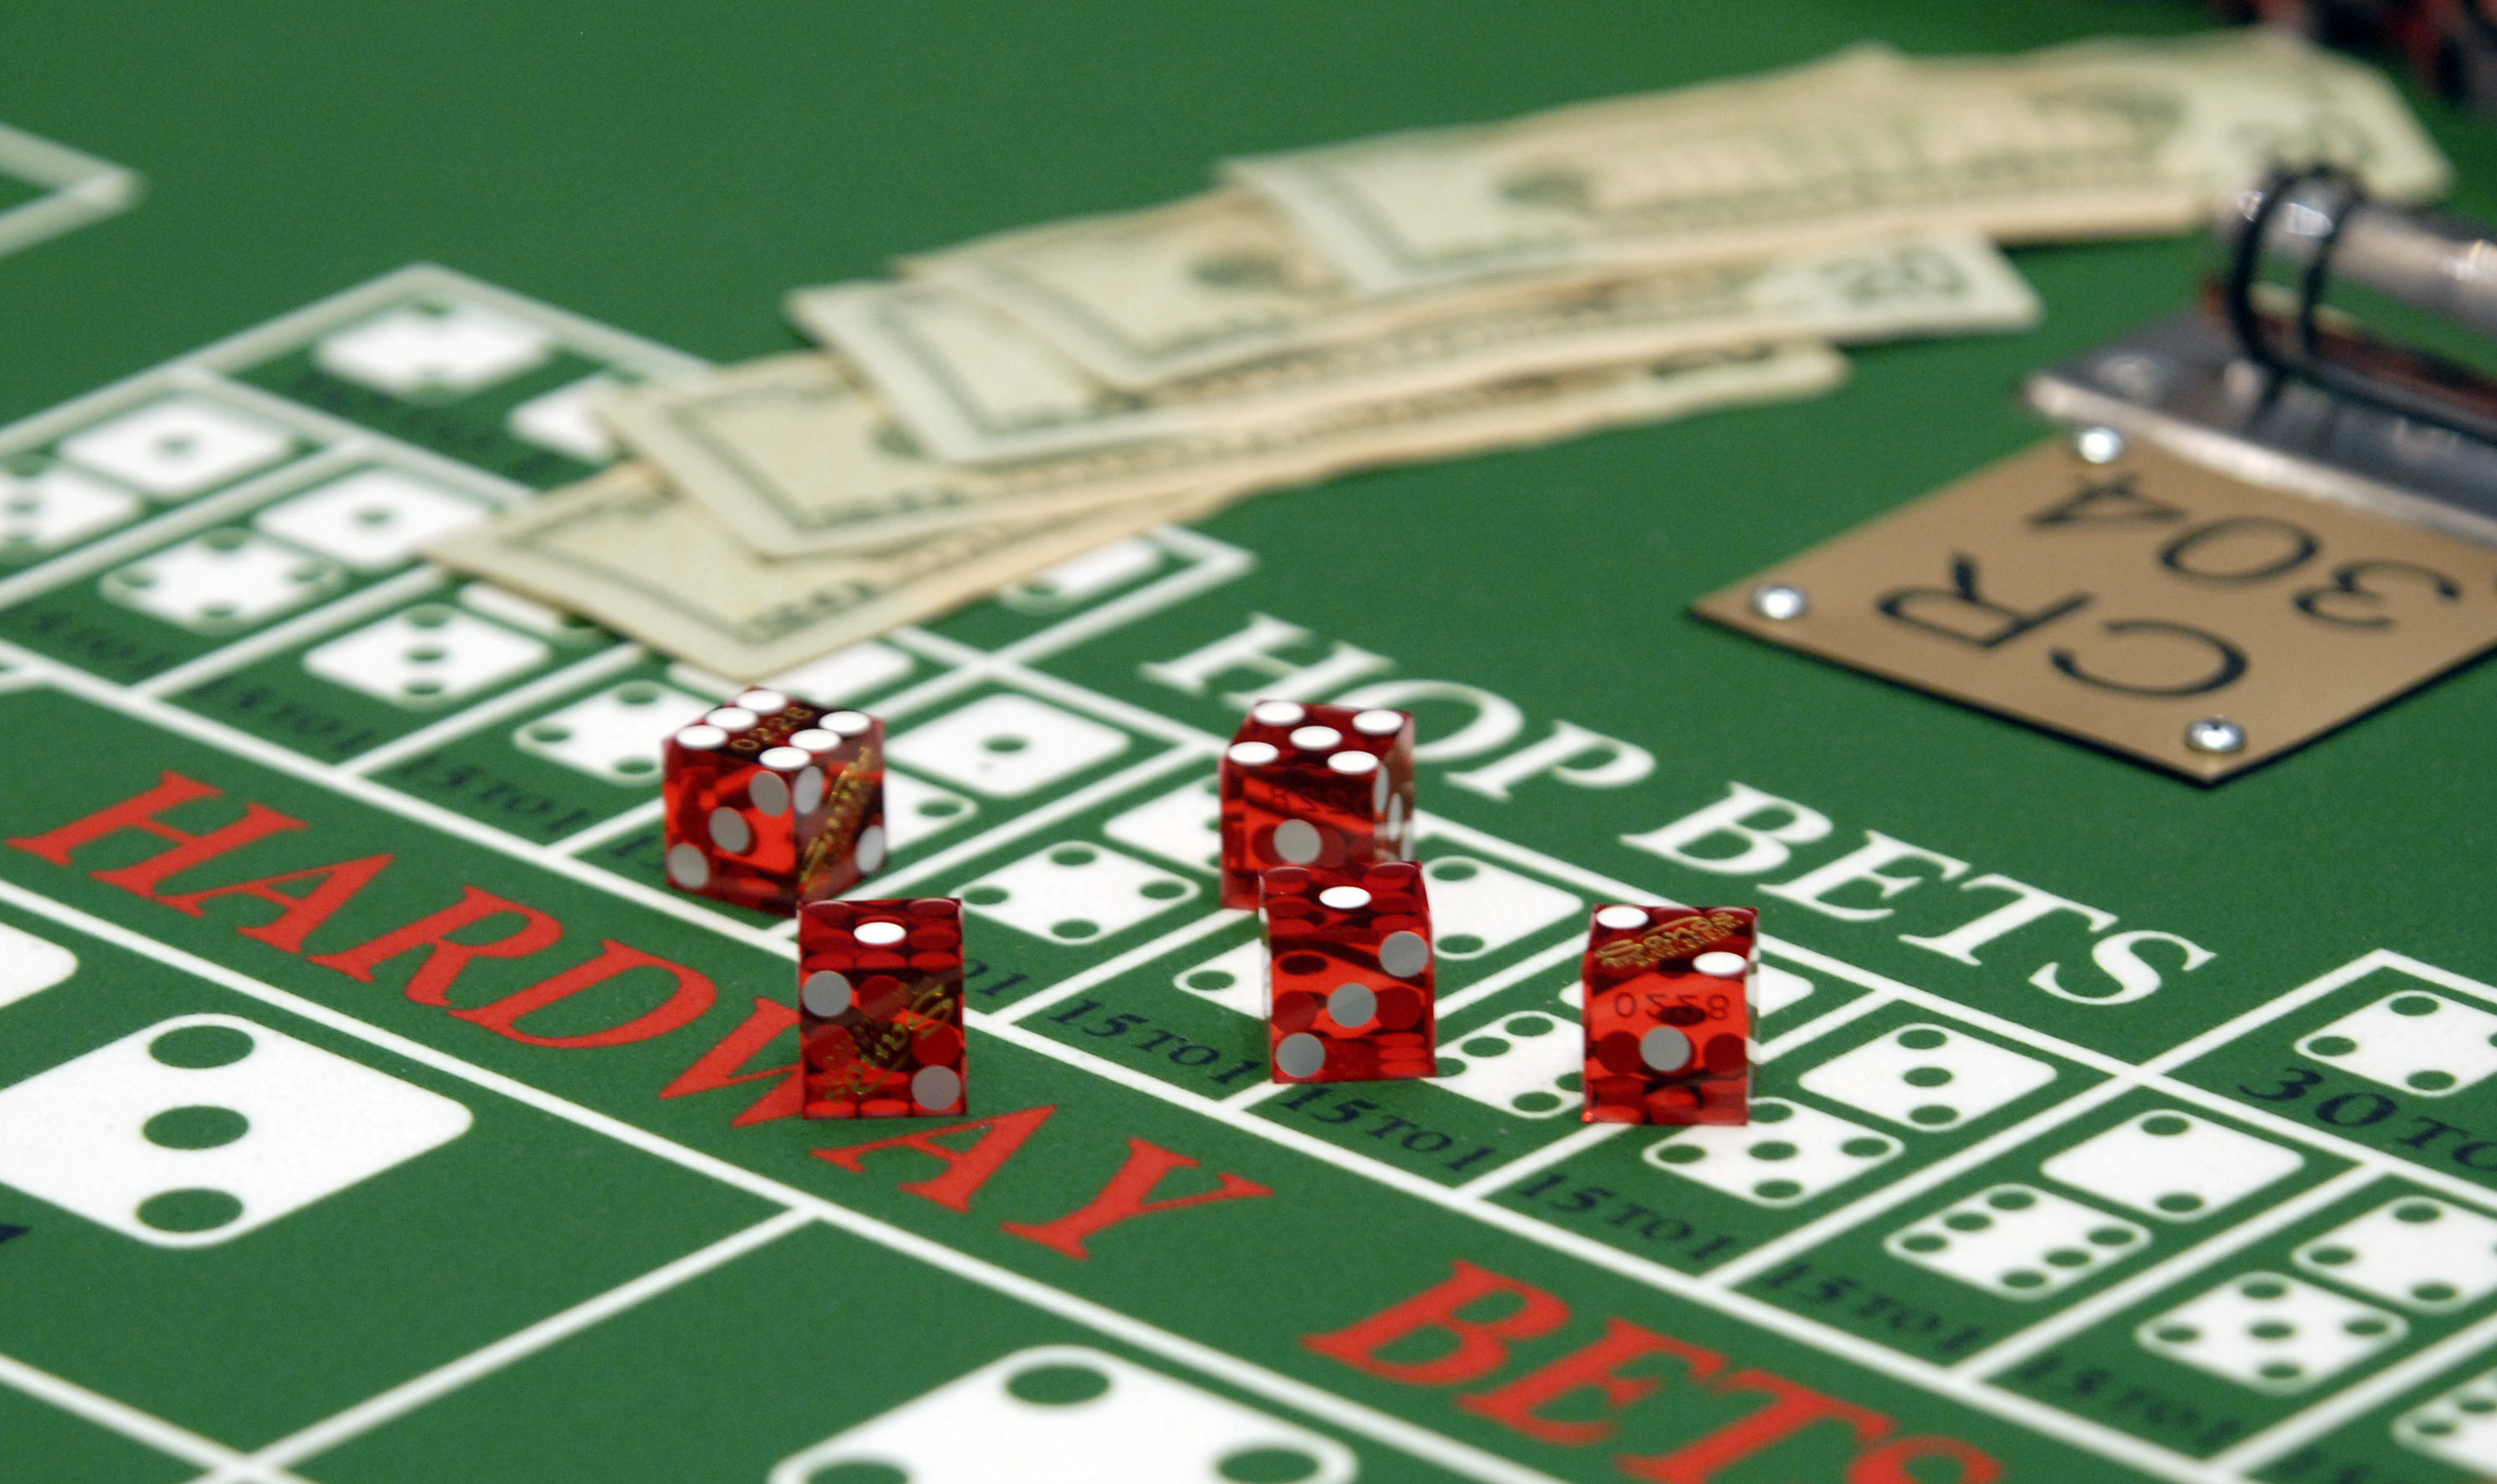 Cash and dice sit on a craps table at the Sands Casino Resort in Bethlehem, Pennsylvania, U.S. Photographer: Bradley C. Bower/Bloomberg